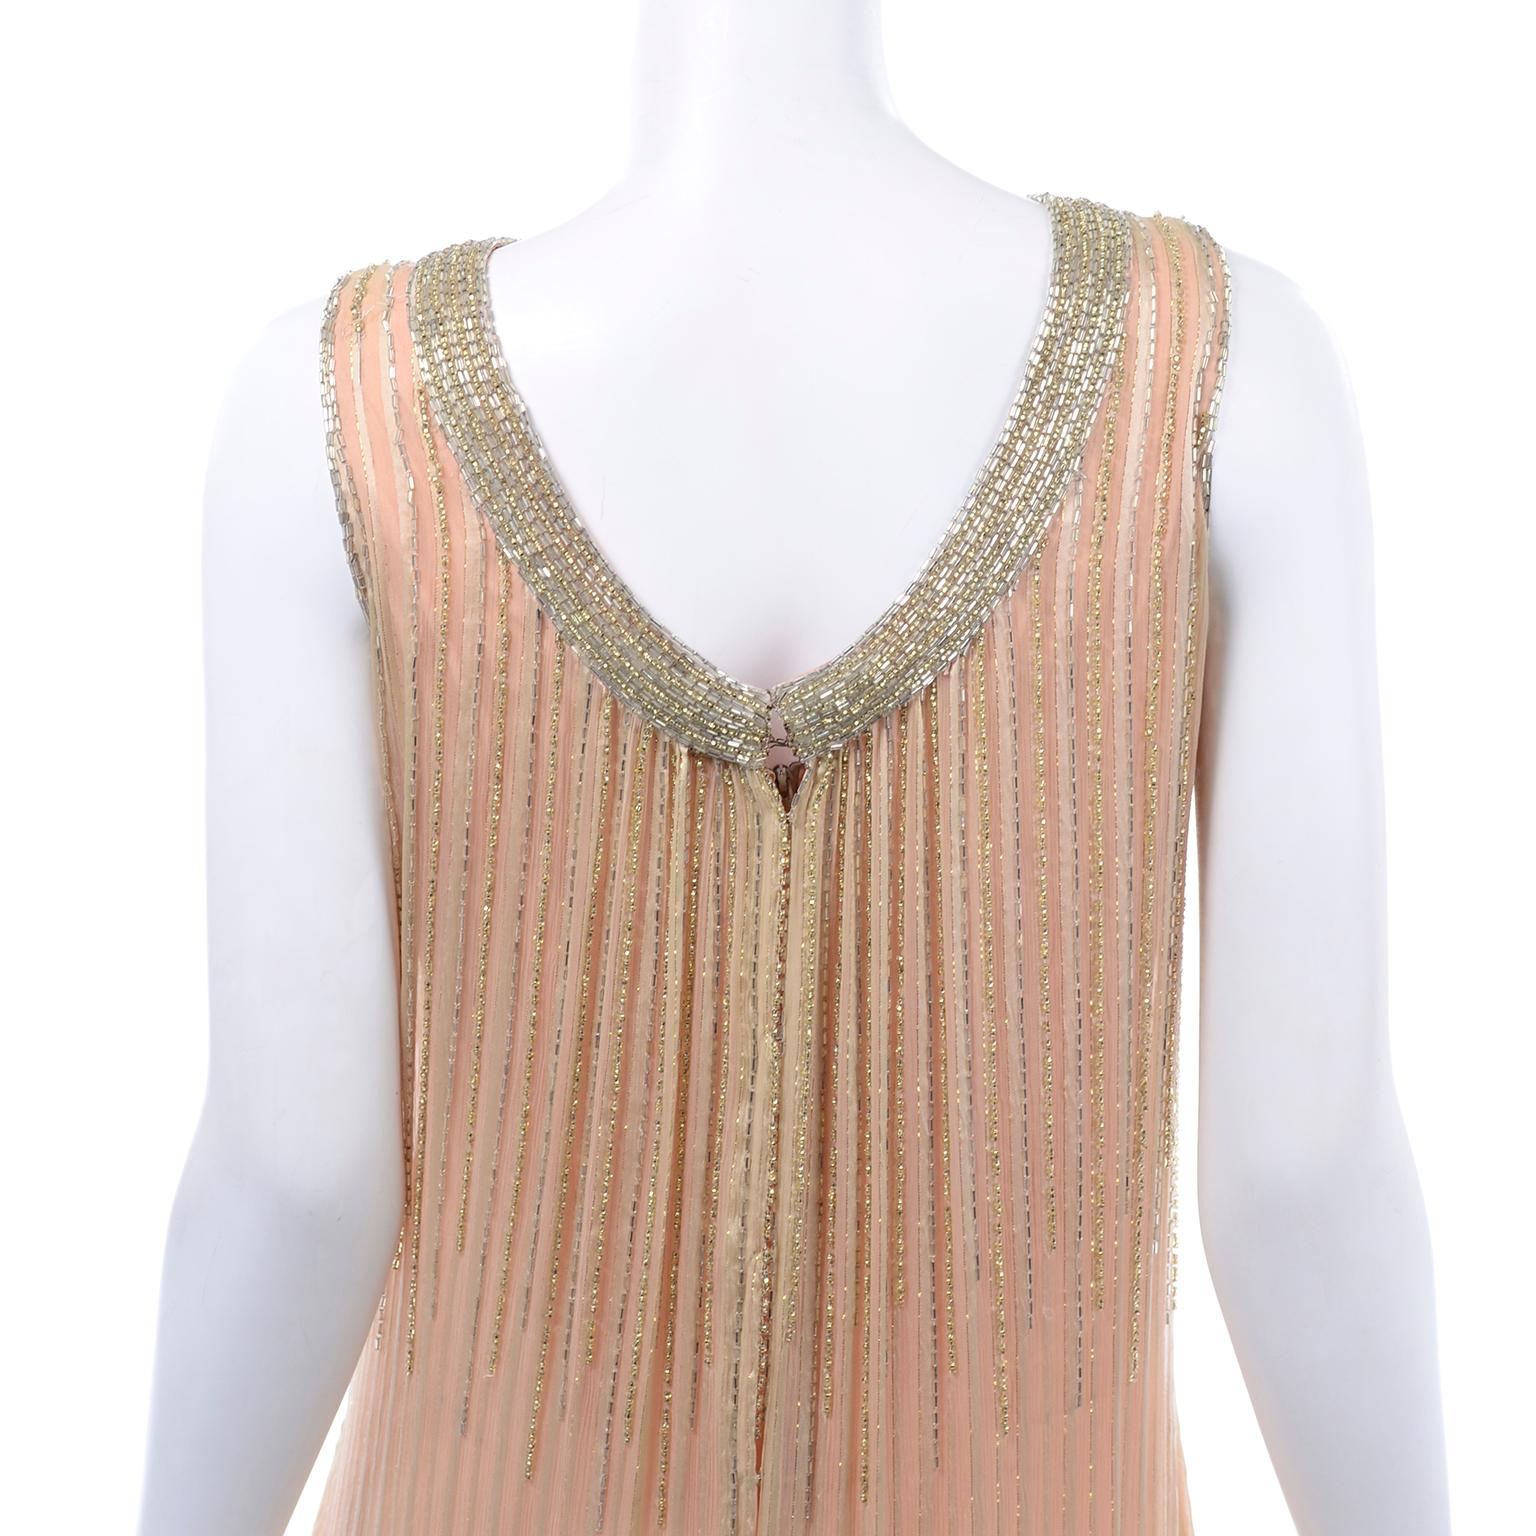 Vintage Peach & Gold Beaded Sheer Evening Dress W Draping w Boutique Label For Sale 2